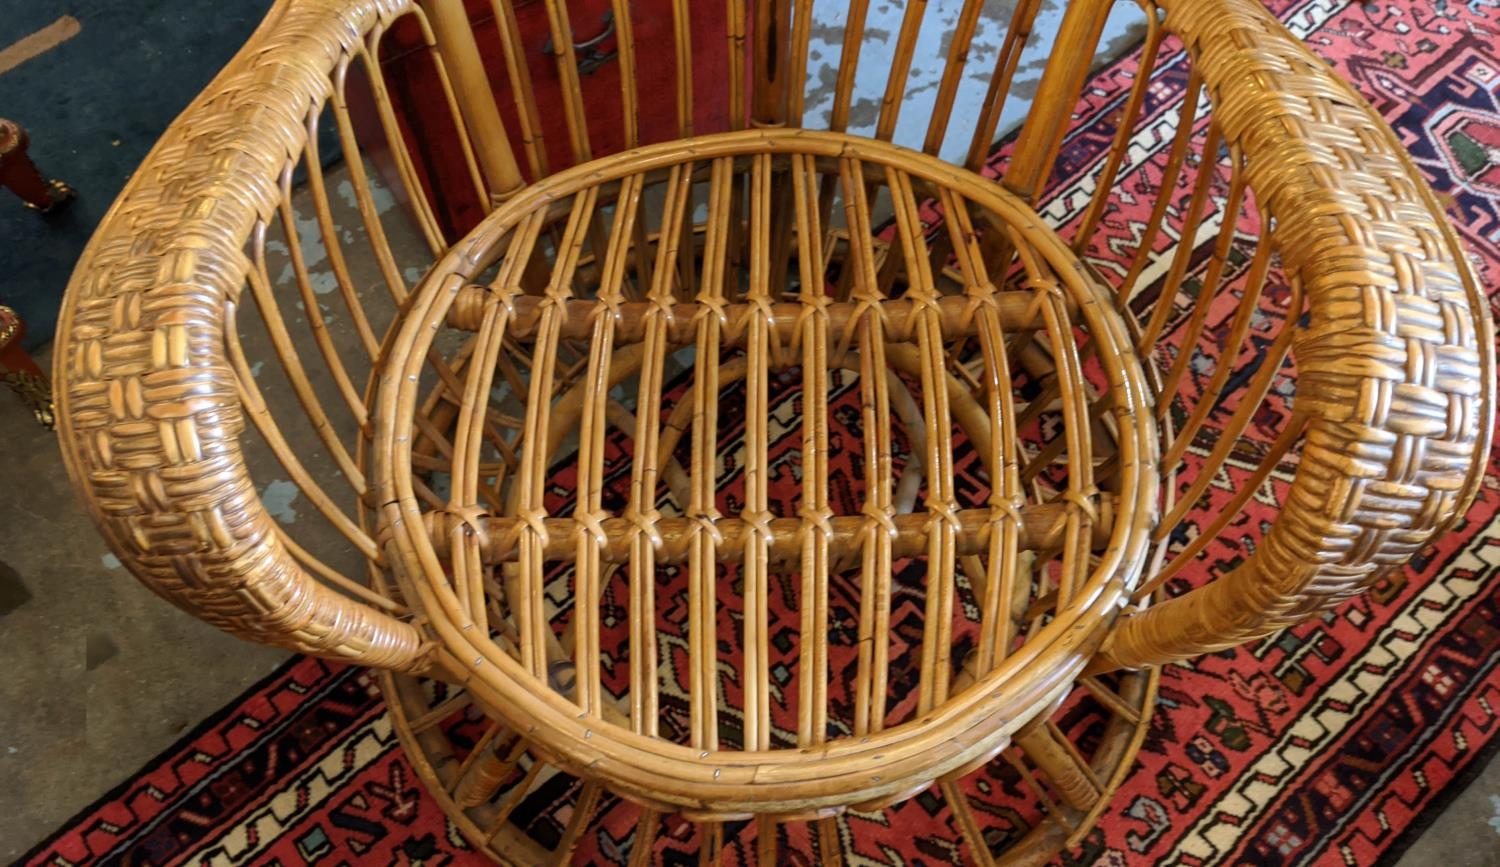 WICKER AND BAMBOO CHAIR, 80cm W x 120cm H, high wing back. - Image 8 of 8